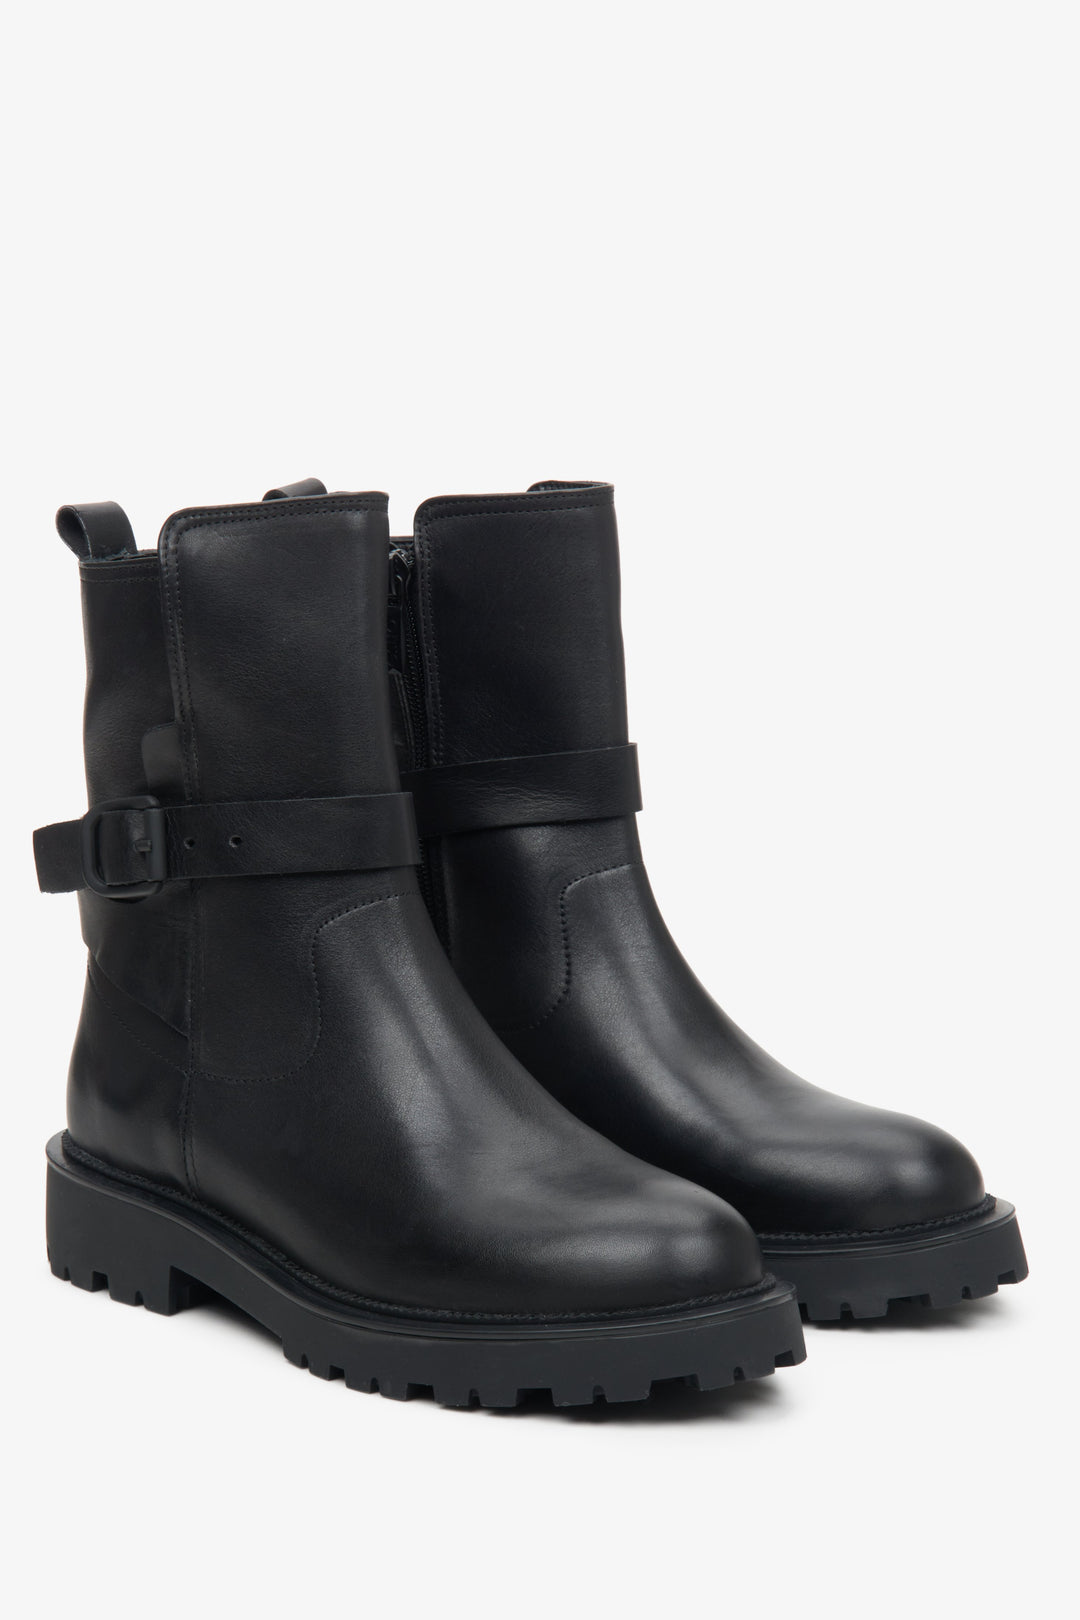 Women's black Estro leather ankle boots with soft uppers - close-up on the toe.